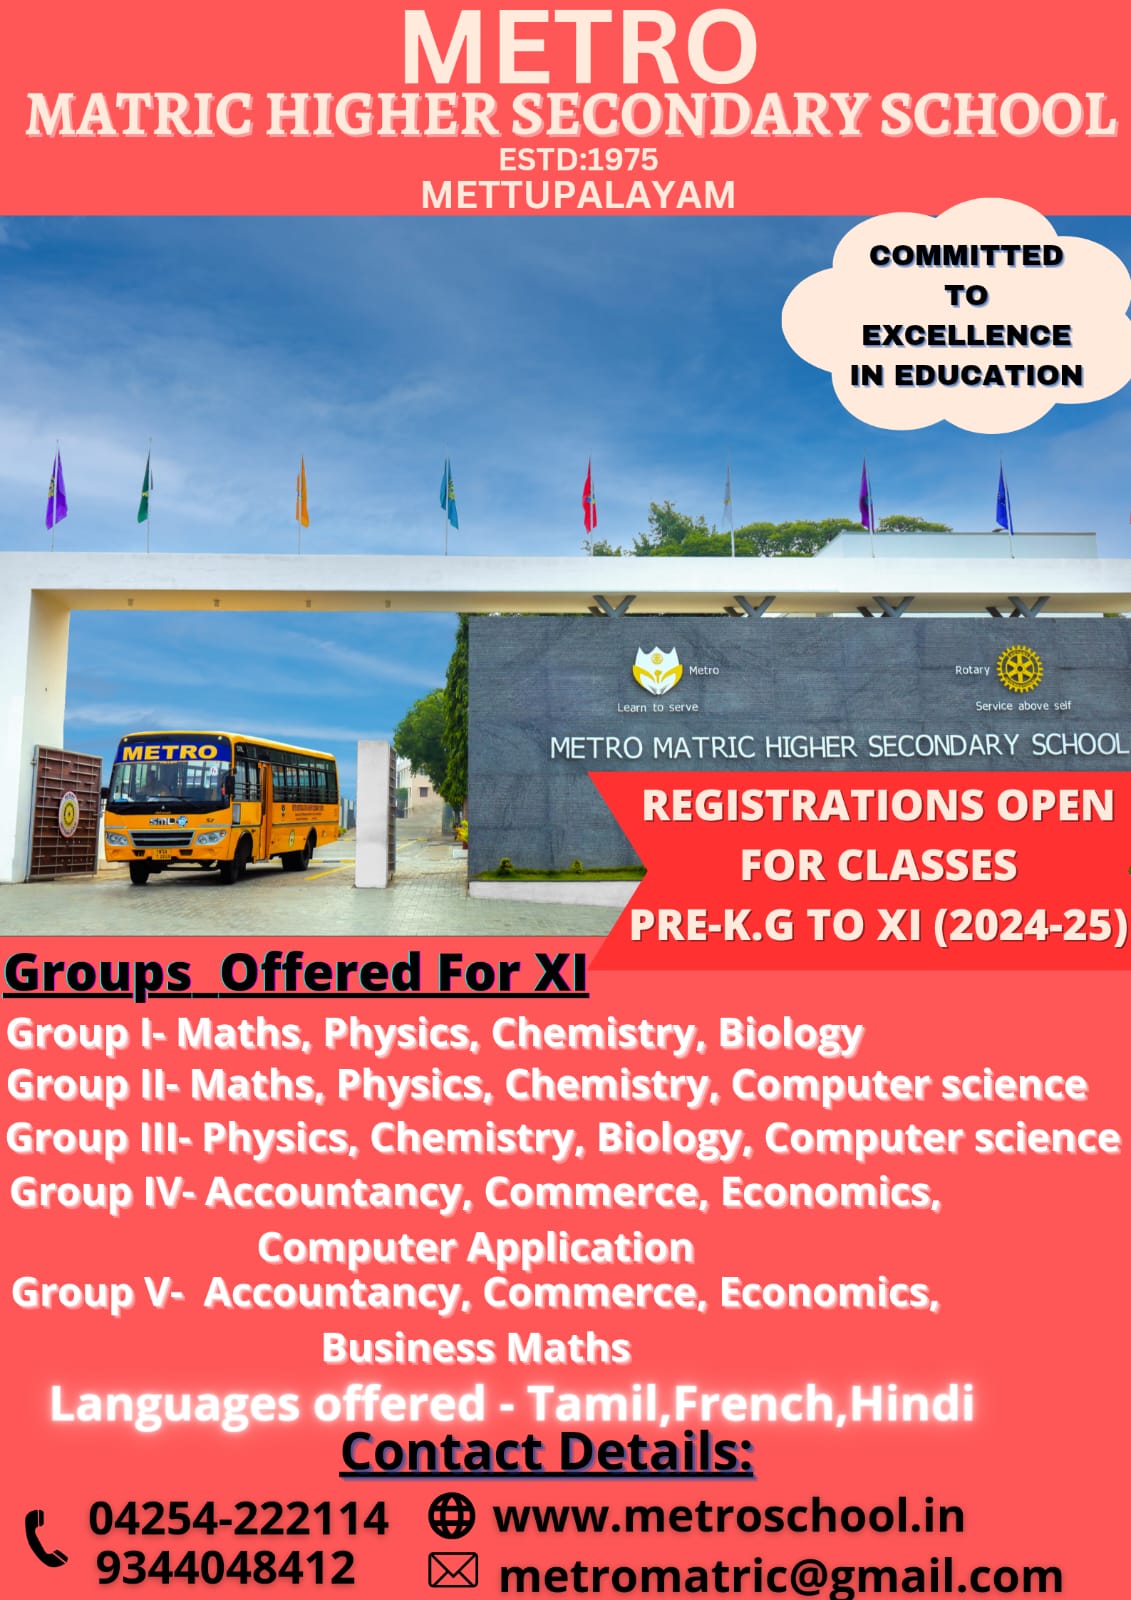 REGISTRATIONS OPEN FOR PRE-KG TO XI(2024-25)